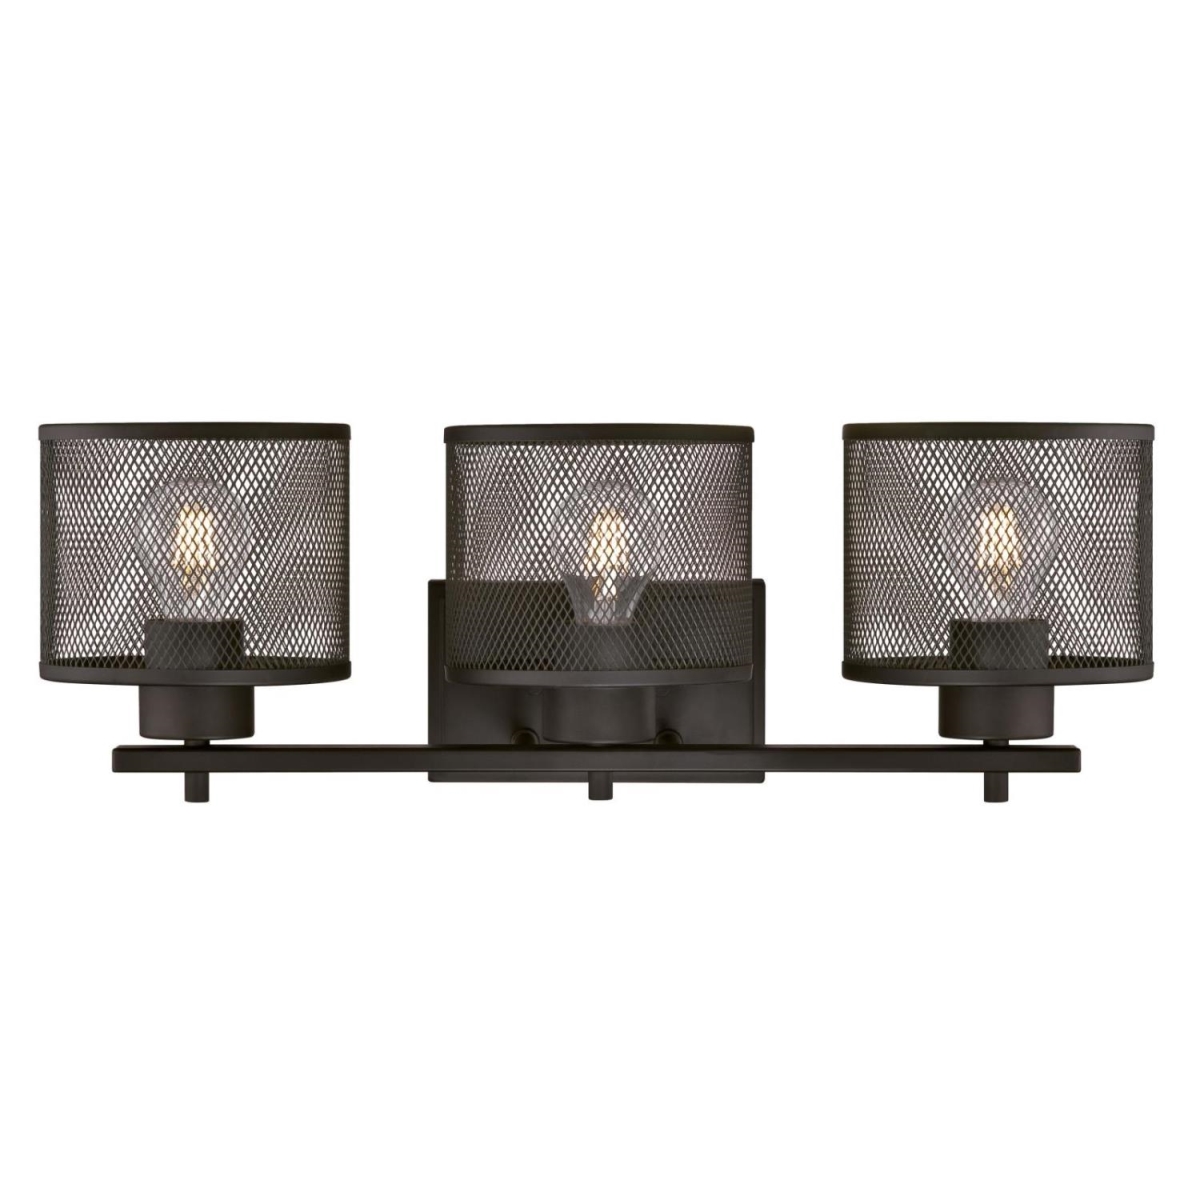 6371000 3 Light Wall Fixture With Mesh Shades - Oil Rubbed Bronze